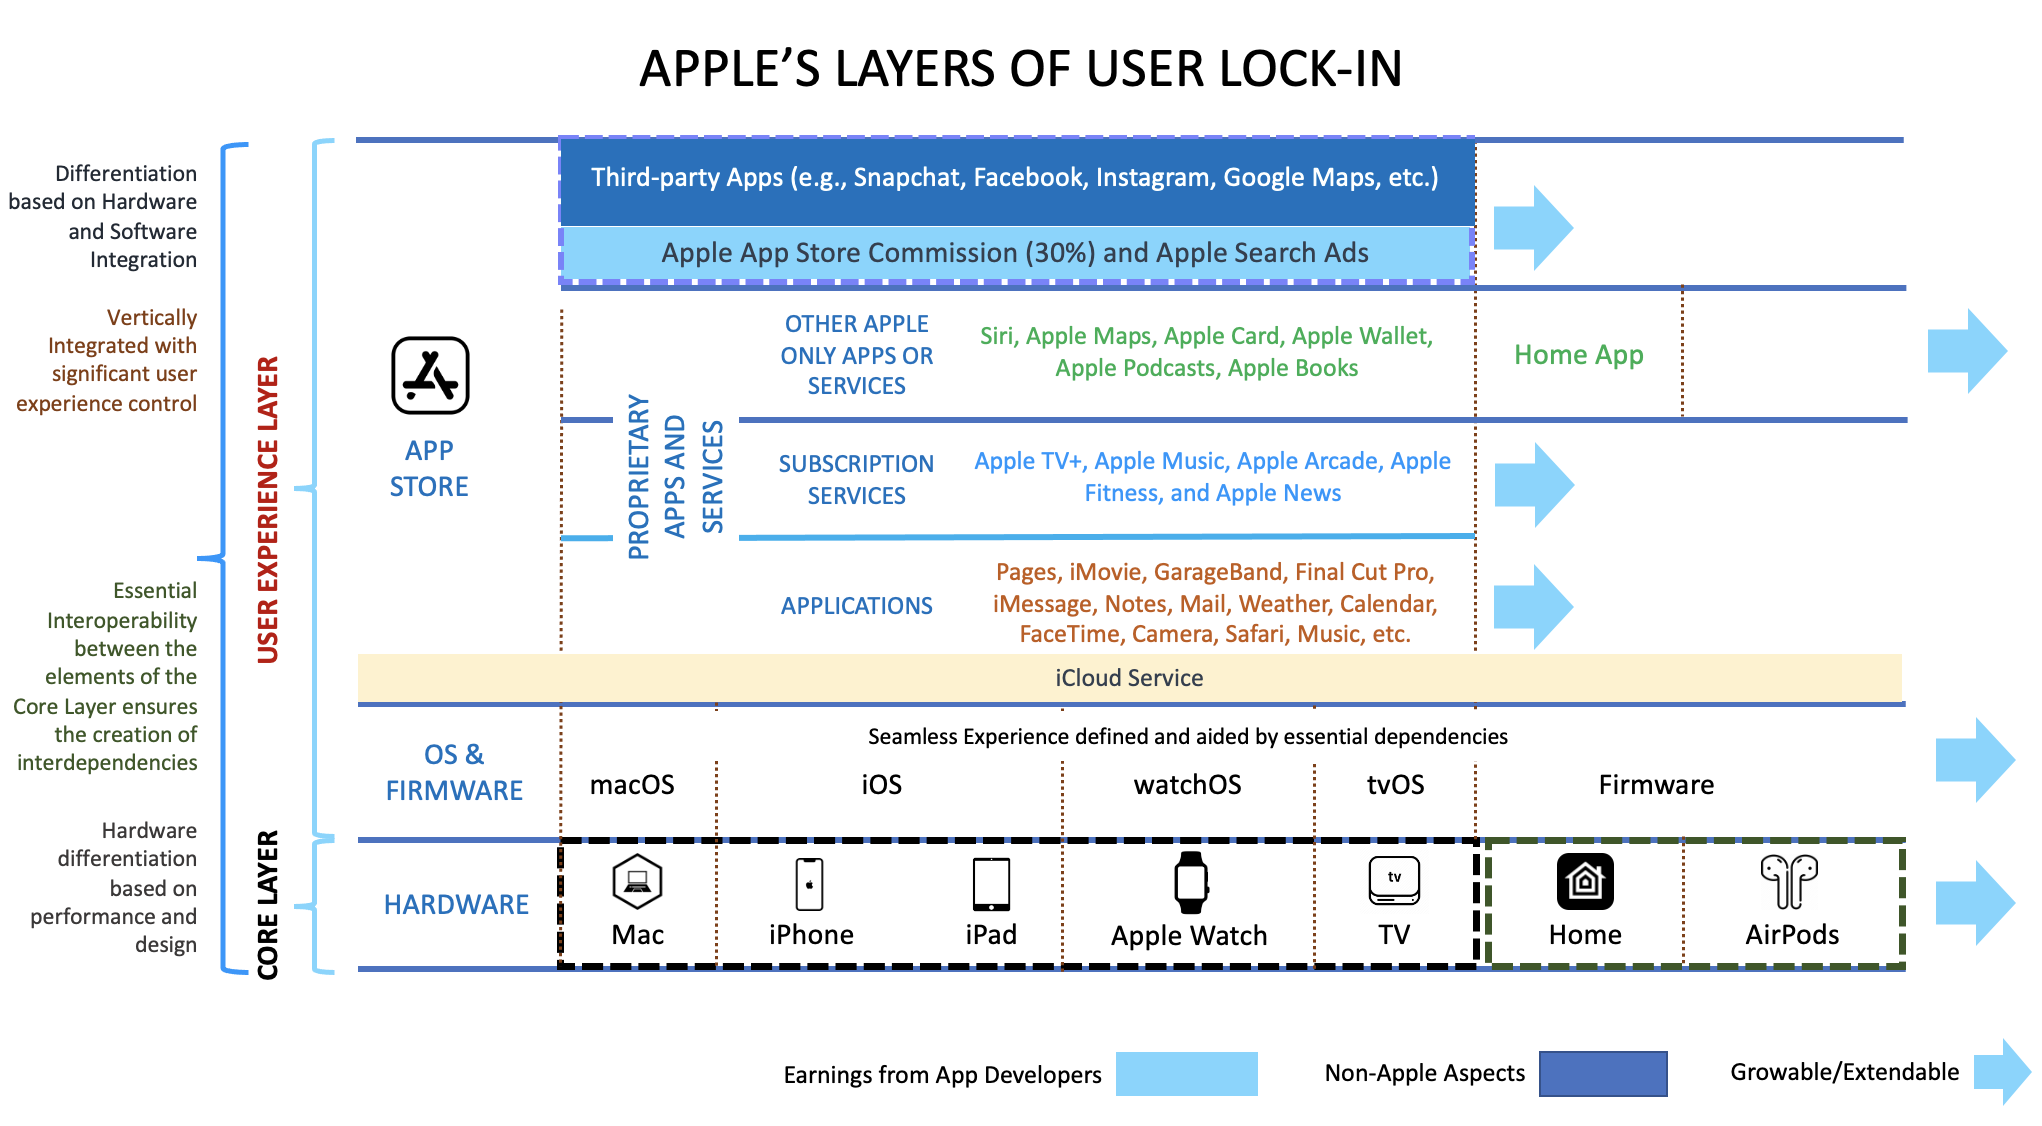 Apple's Differentiation and User lock-in strategy